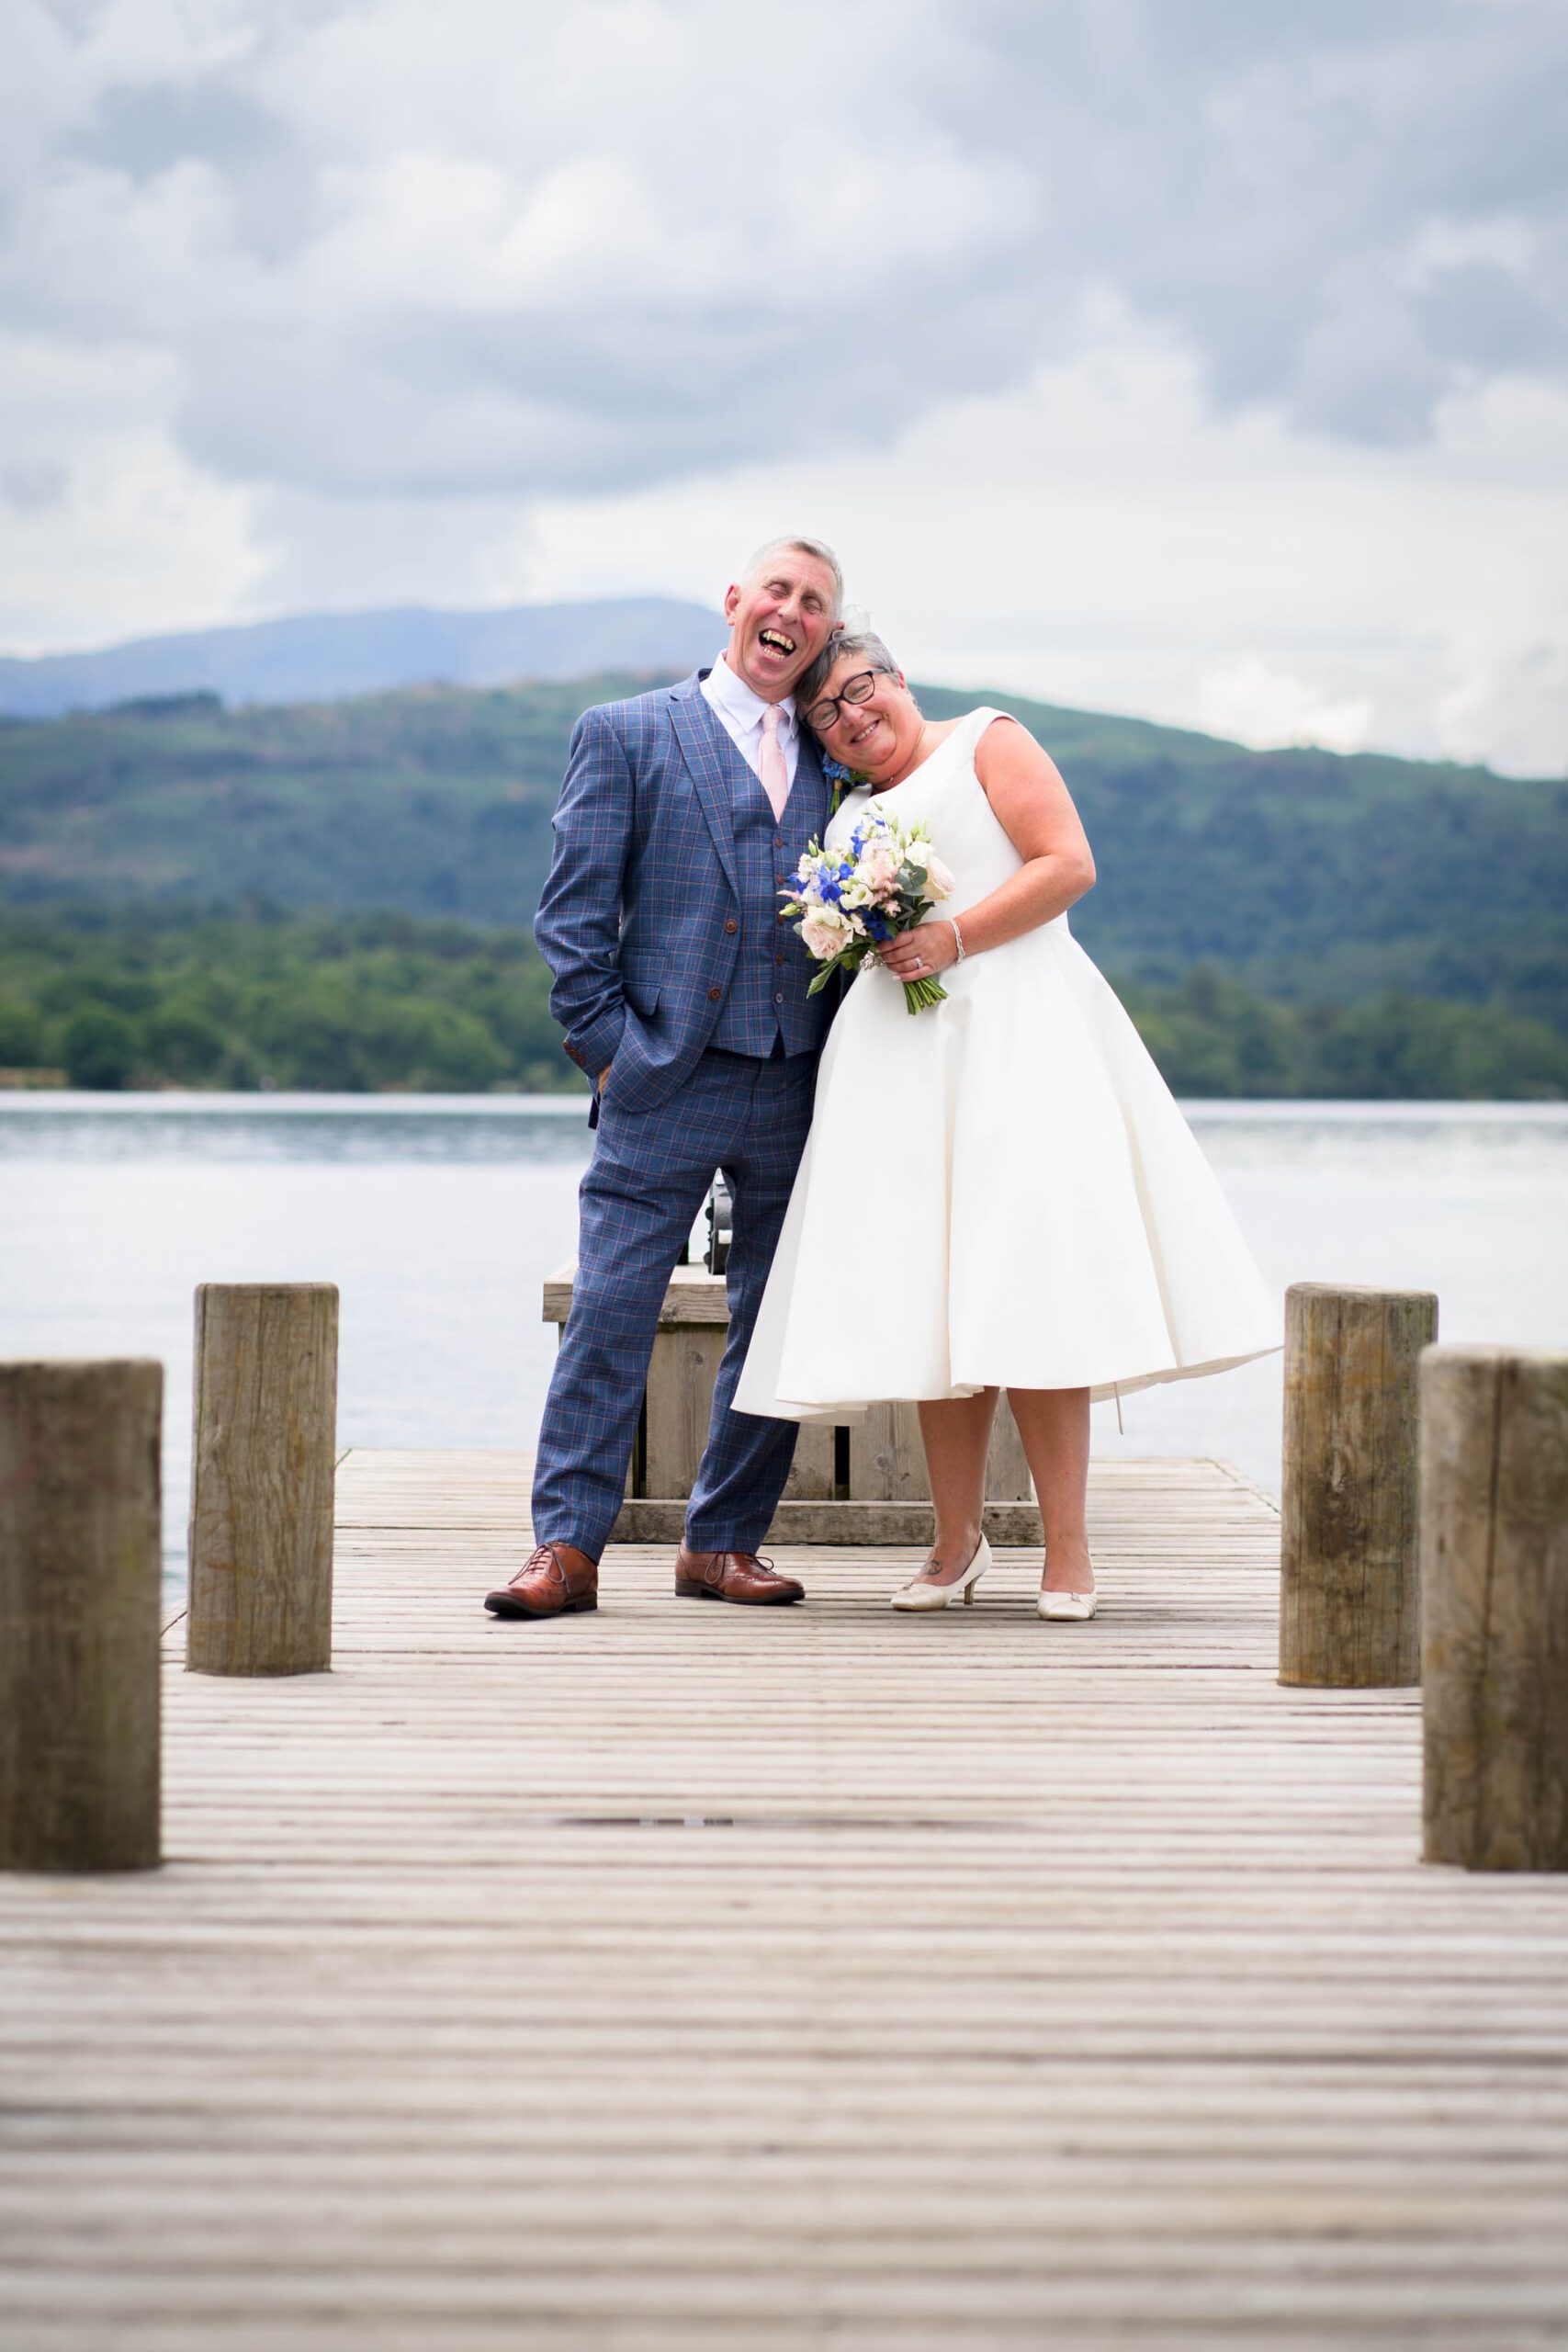 Wedding portrait of bride and groom on jetty at Windermere with lake and mountains in background. Taken at their Low Wood Bay Resort wedding.